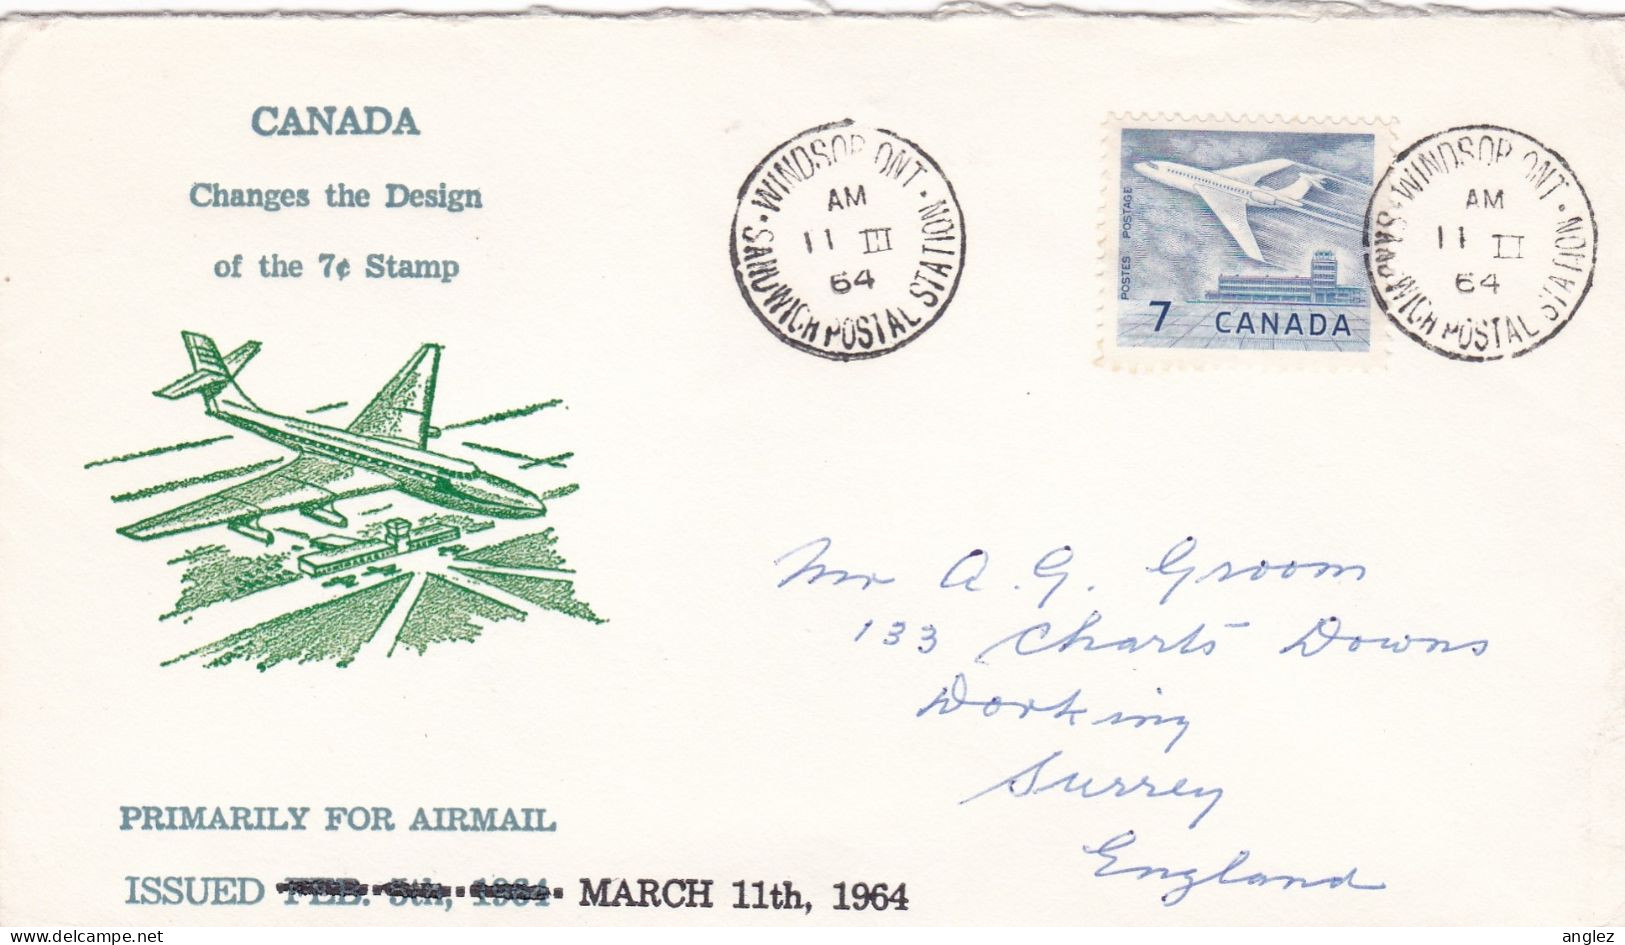 Canada - 1964 7c Airmail Stamp Changed Design Illustrated FDC - Charity Seal - Posta Aerea